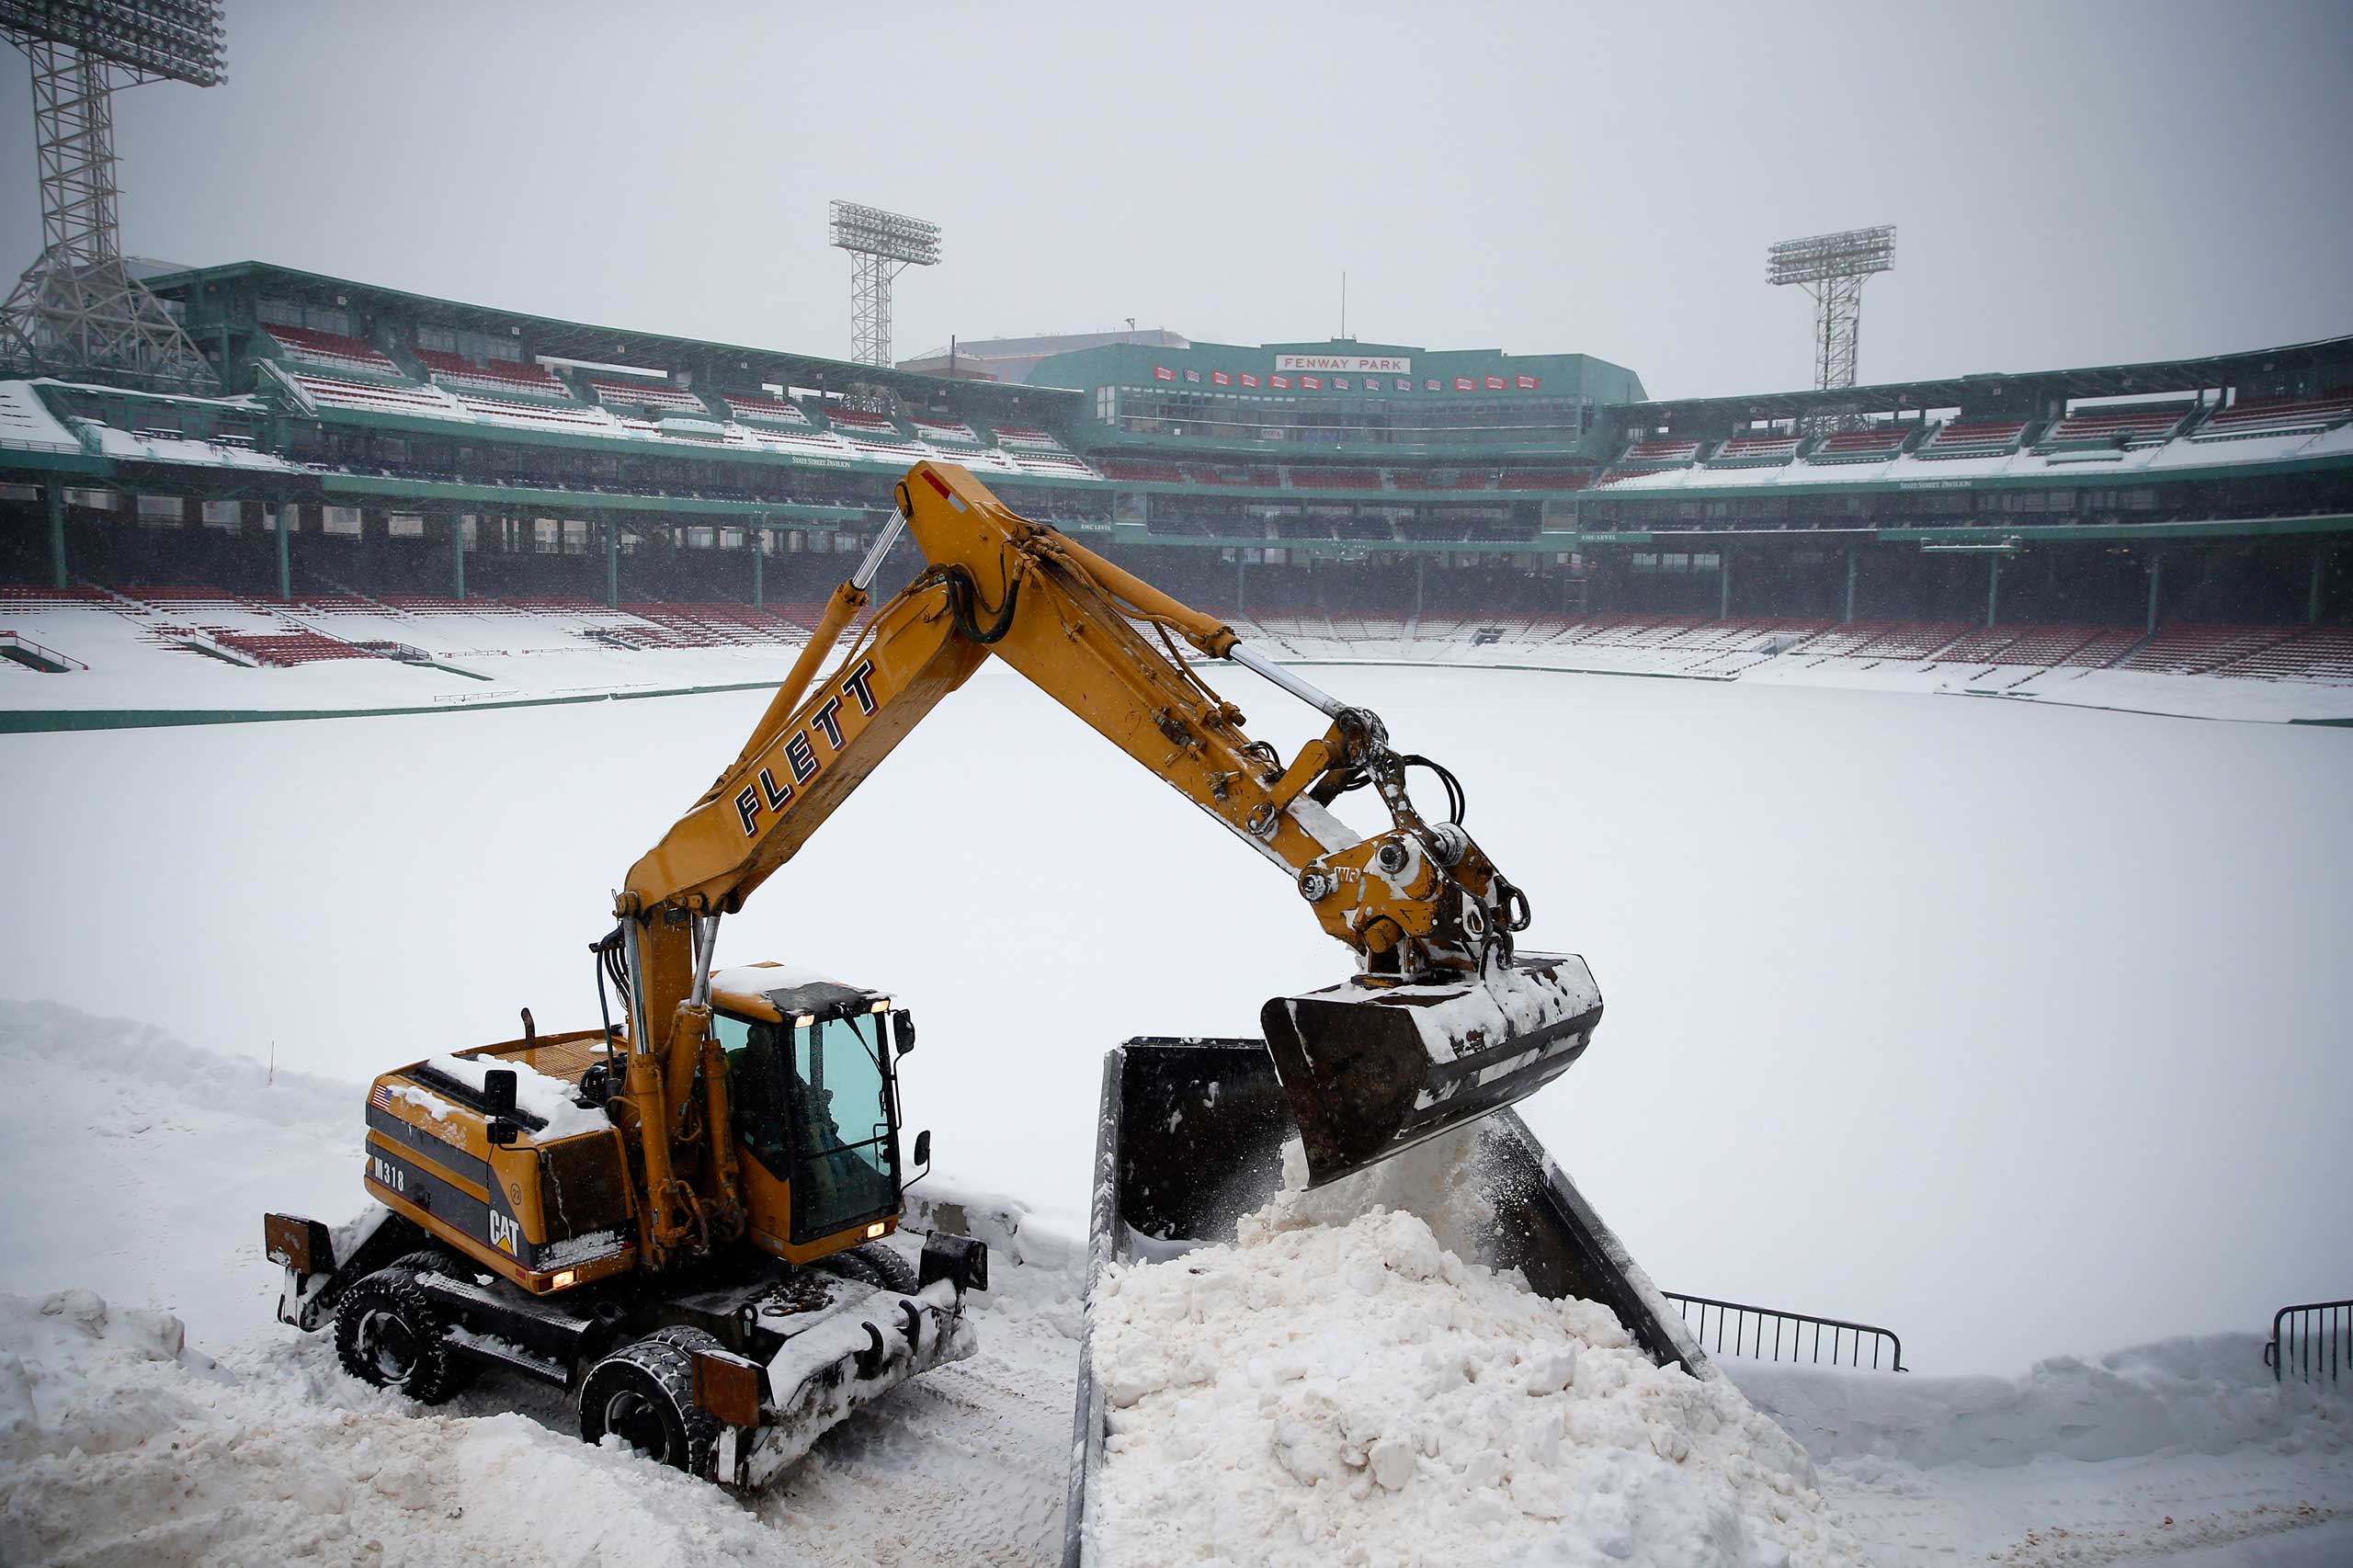 A piece of heavy equipment is used to clear snow from the warning track at Fenway Park in Boston on Feb. 9, 2015.